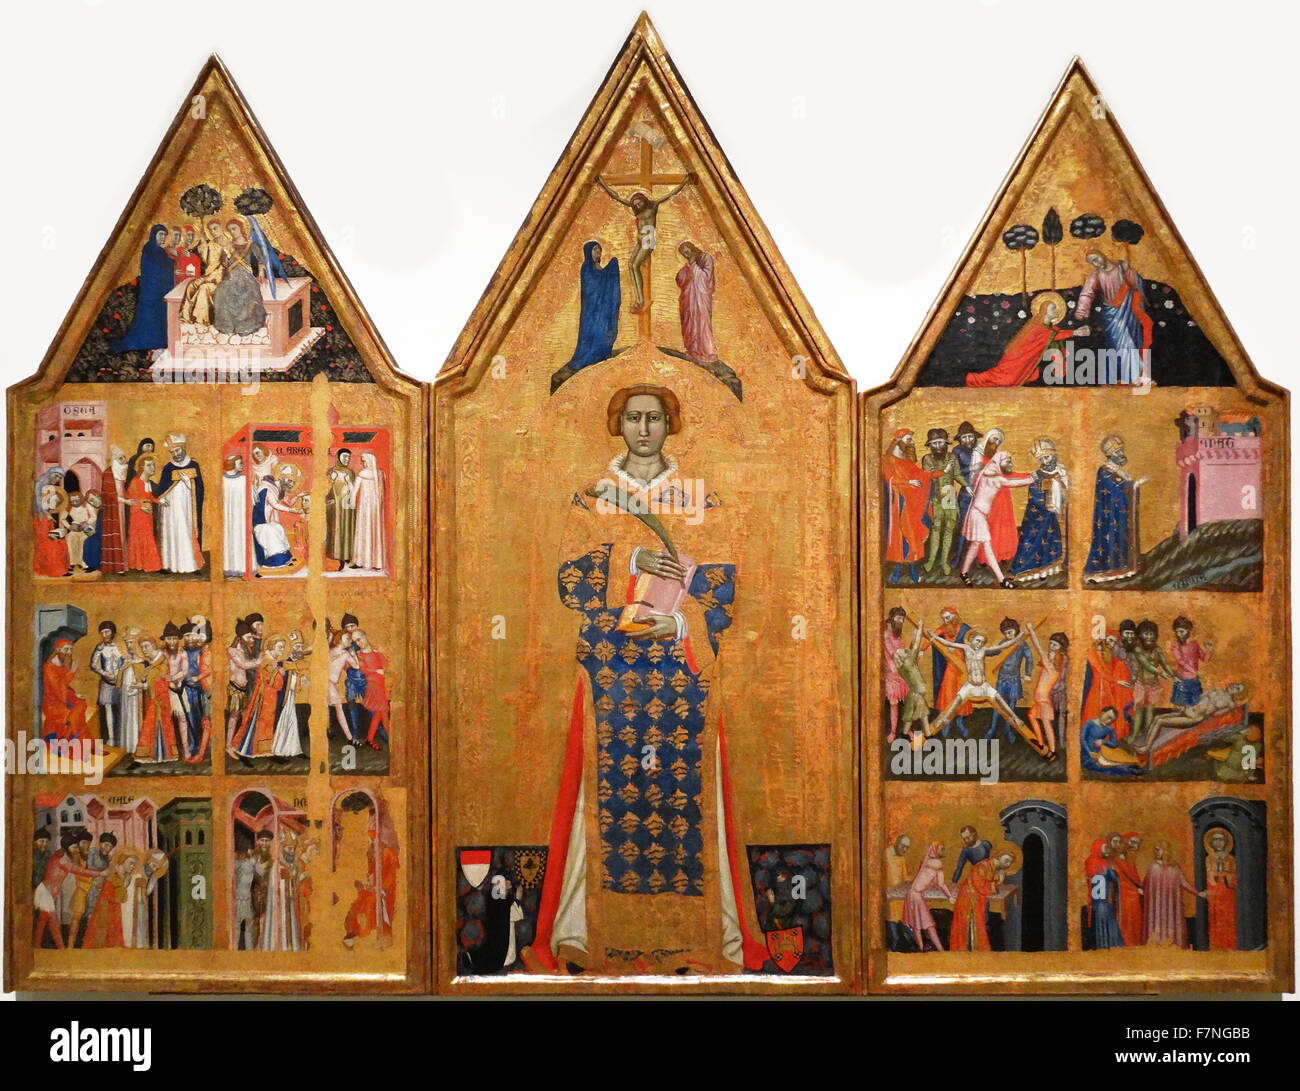 Altarpiece by the Master of Estopanya; Italian painter, active in Aragon and Catalonia, around the second half of the XIV century. Around 1350-1370. Tempera and gold on wood with gold leaf Stock Photo